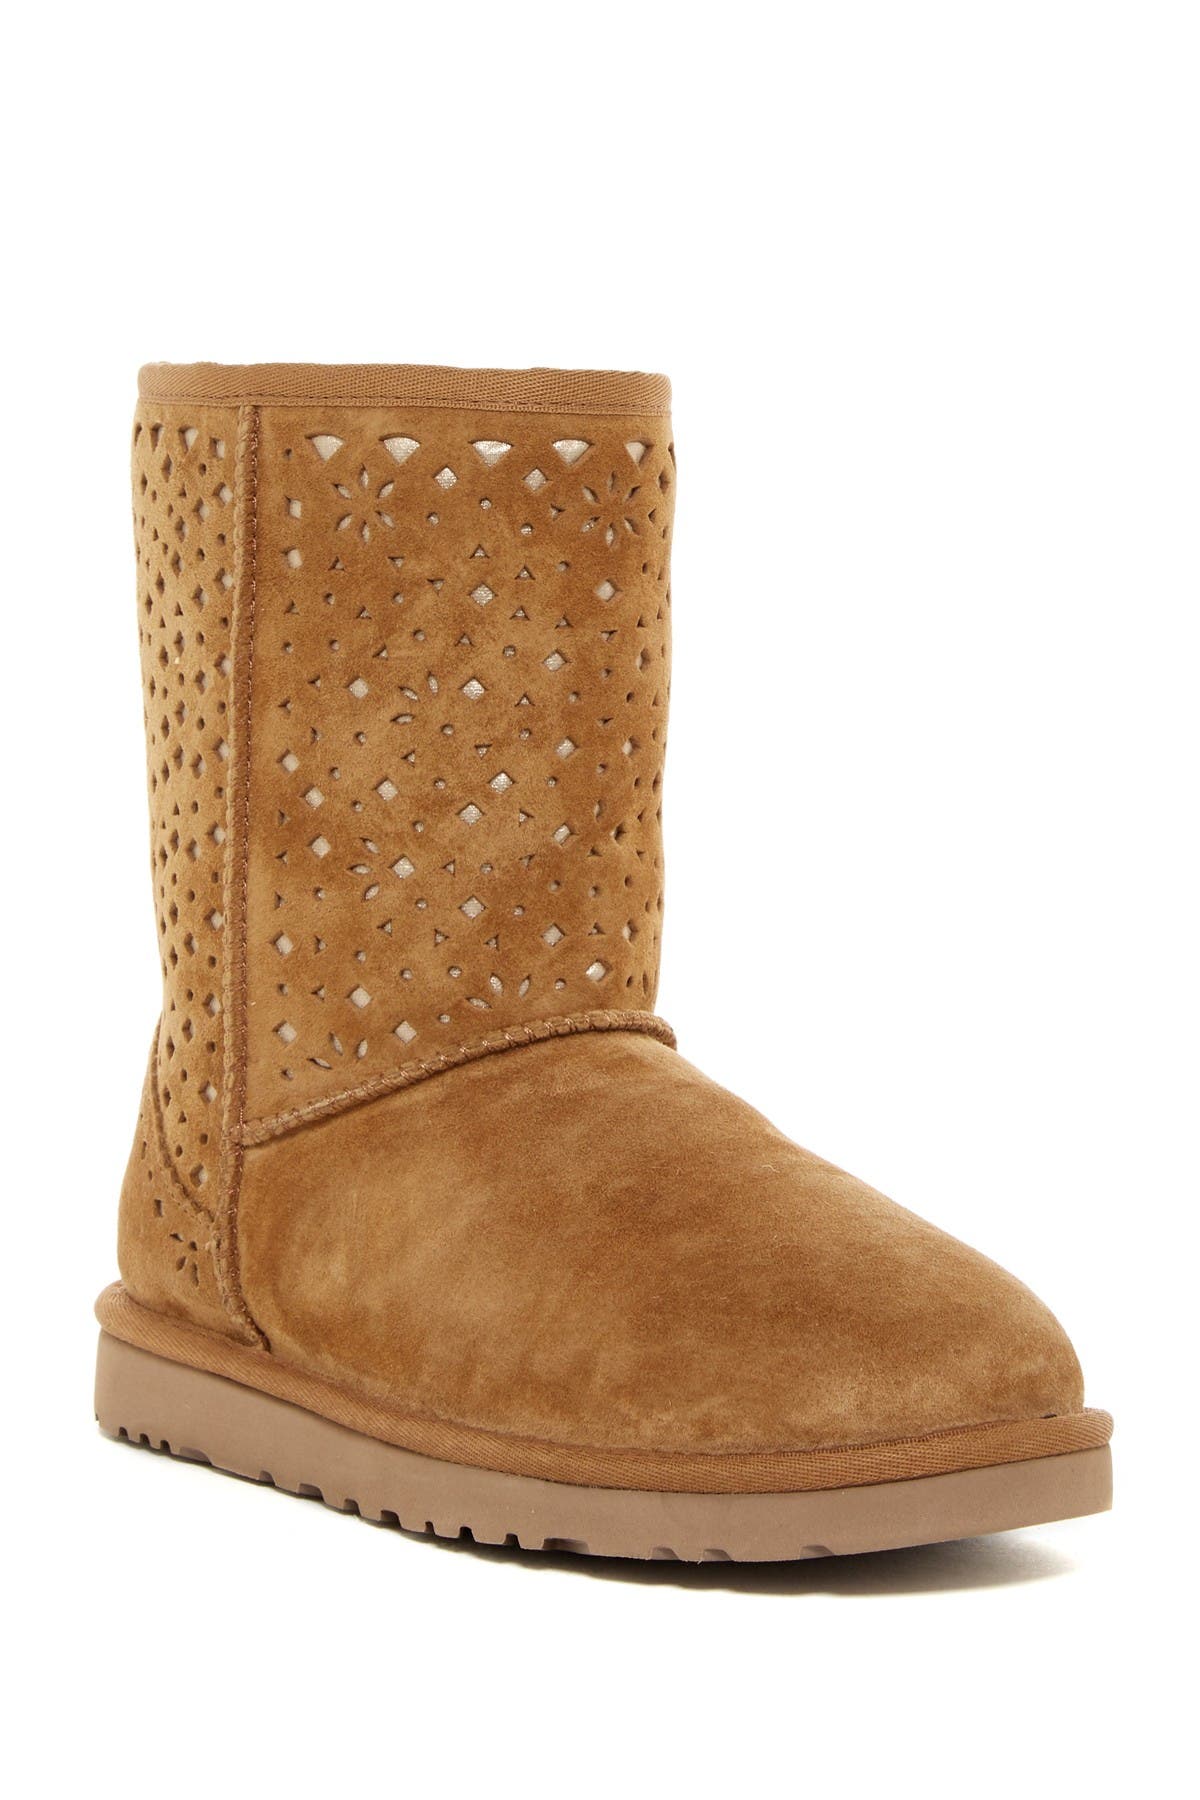 ugg perforated boots